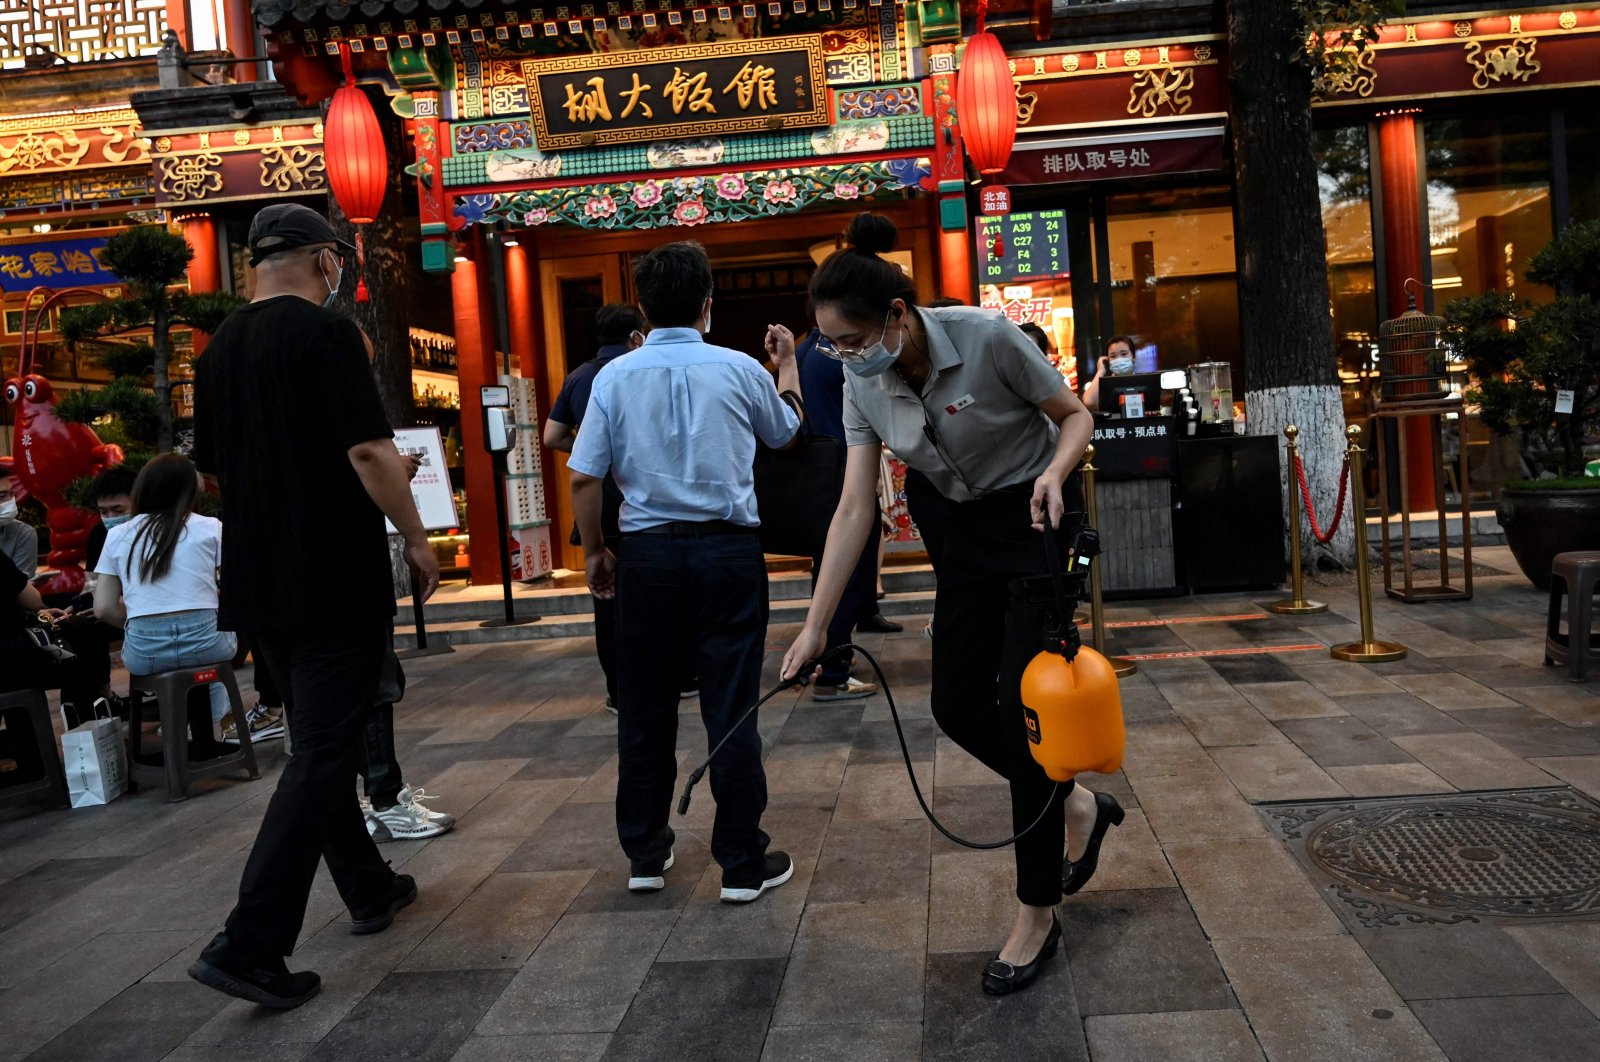 An employee sprays disinfectant outside a restaurant along a street in Beijing, China, June 6, 2022. (AFP Photo)